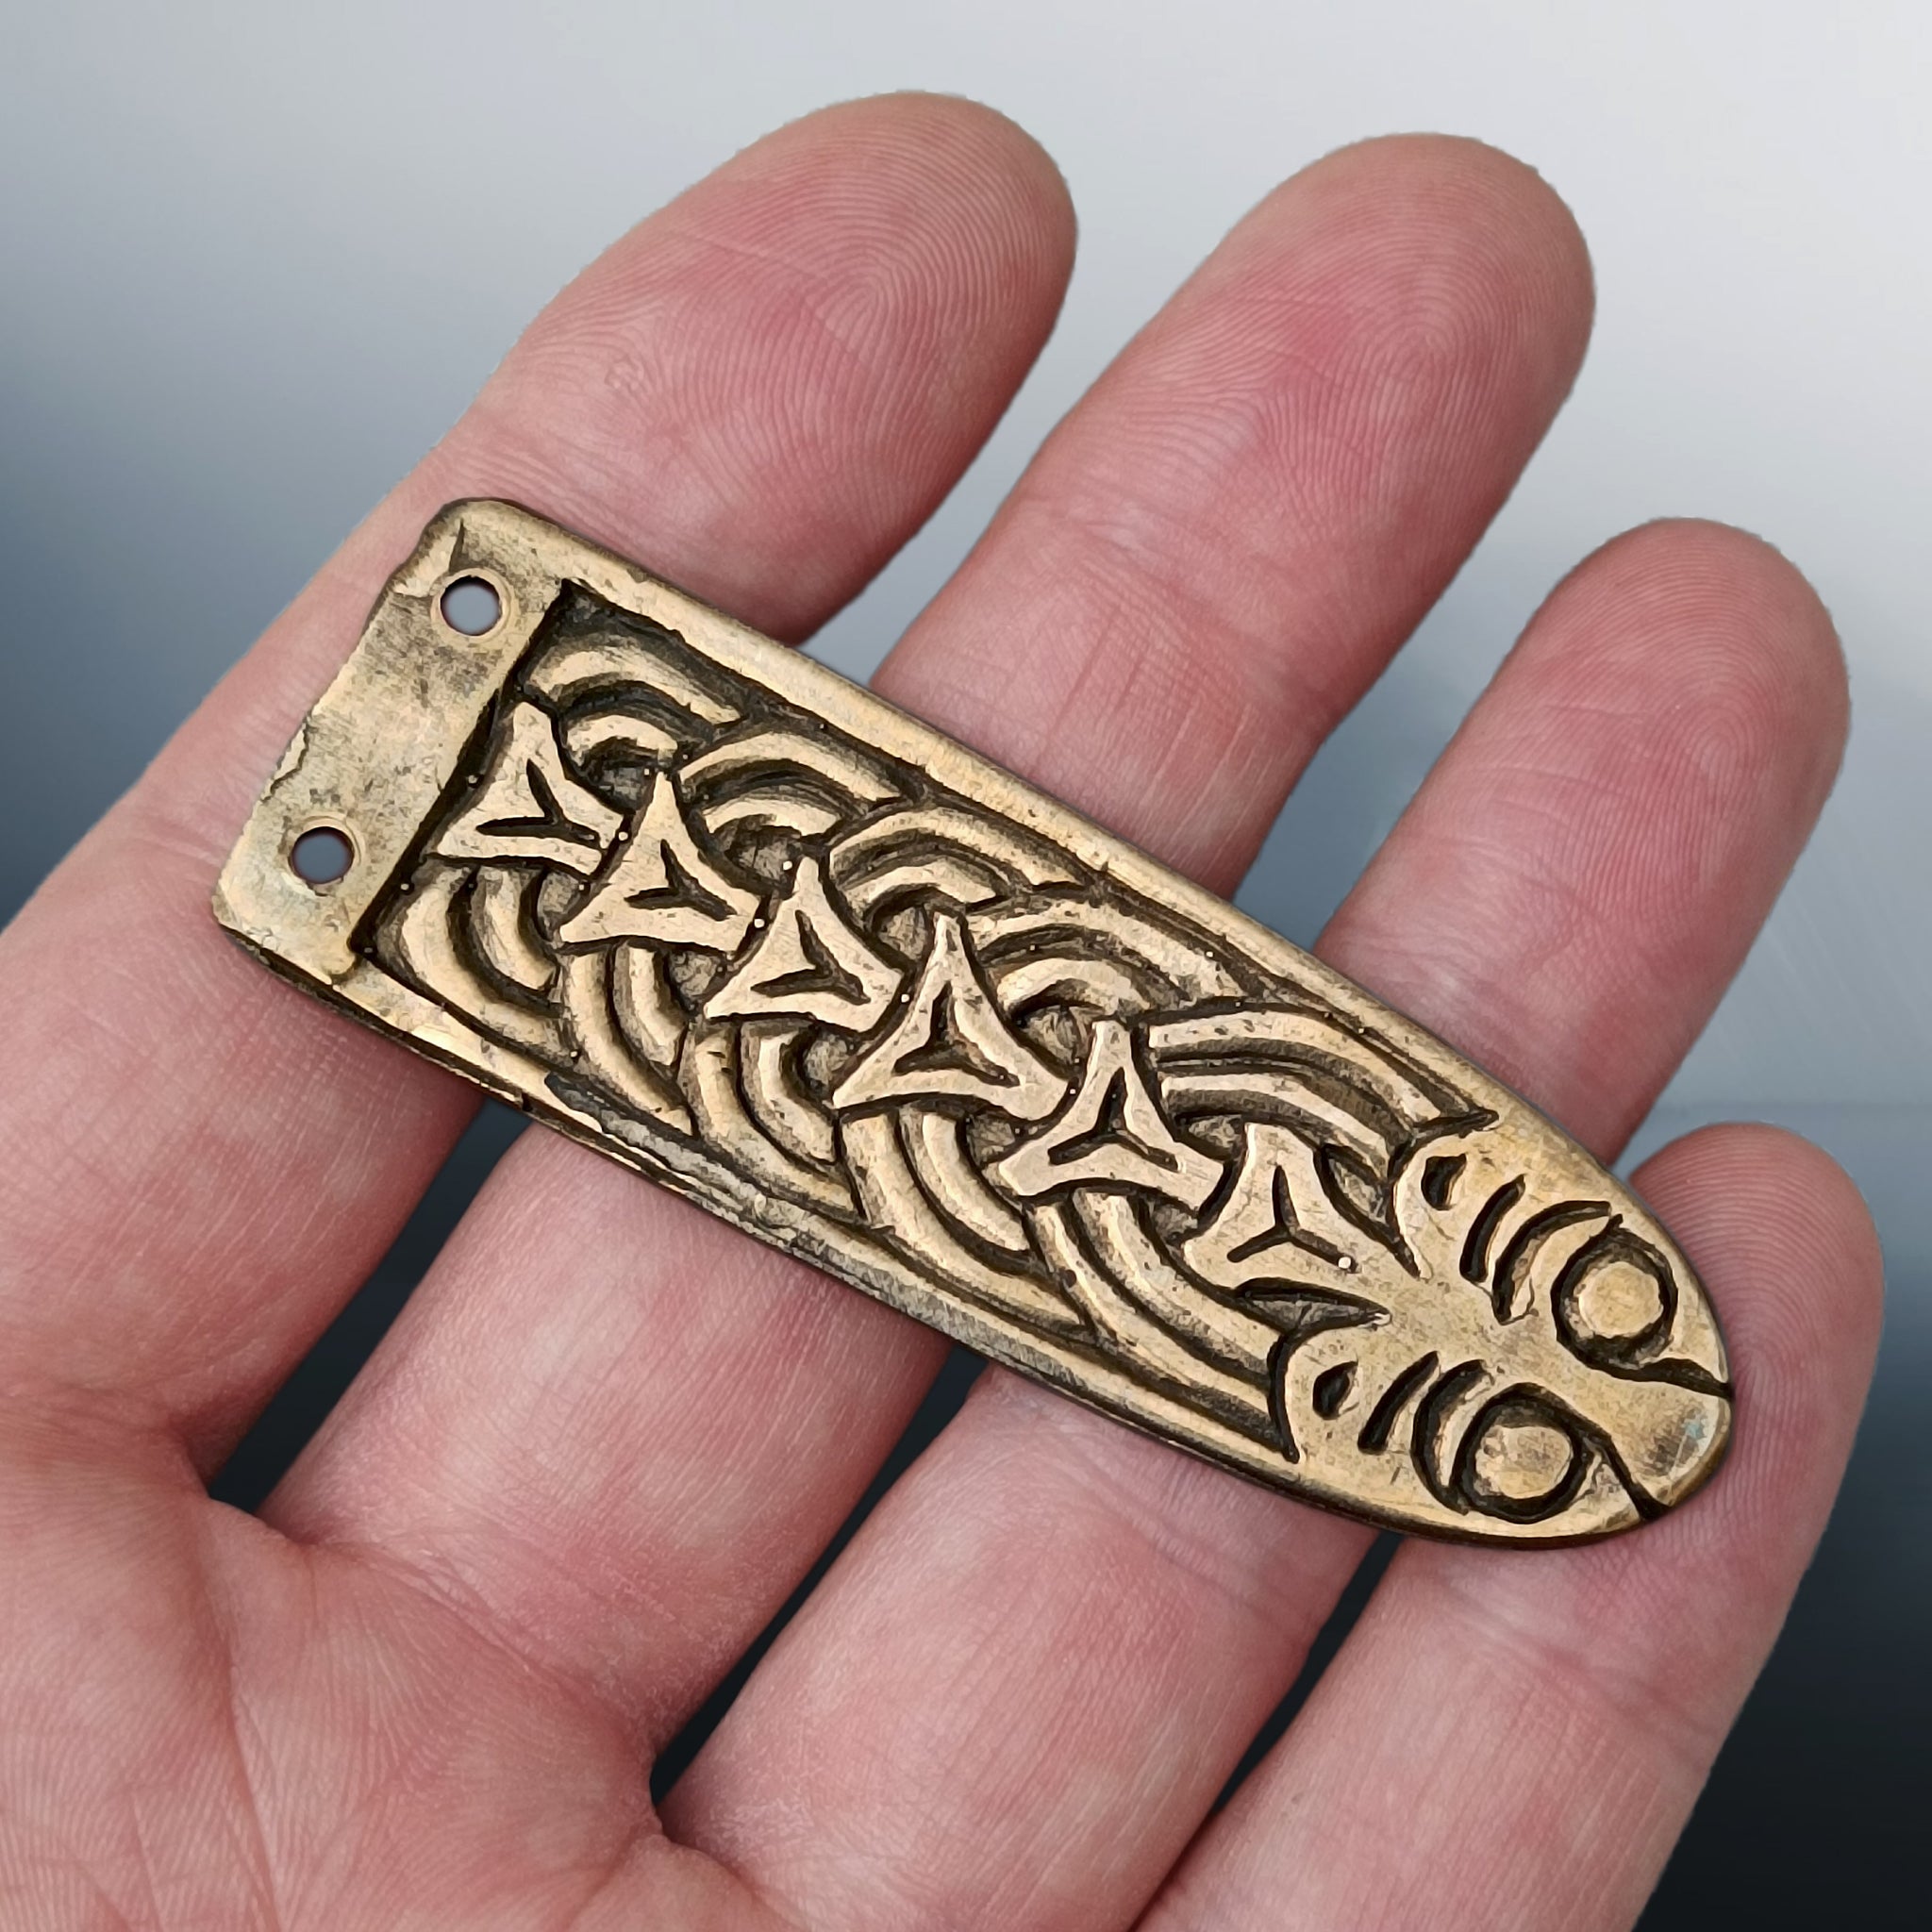 Tiwaz belt buckle, Old Norse Scandinavian Nordic Celtic Viking Pagan TYR  runic solid brass belt buckle for casual 1.5 or 1.8 inches belts